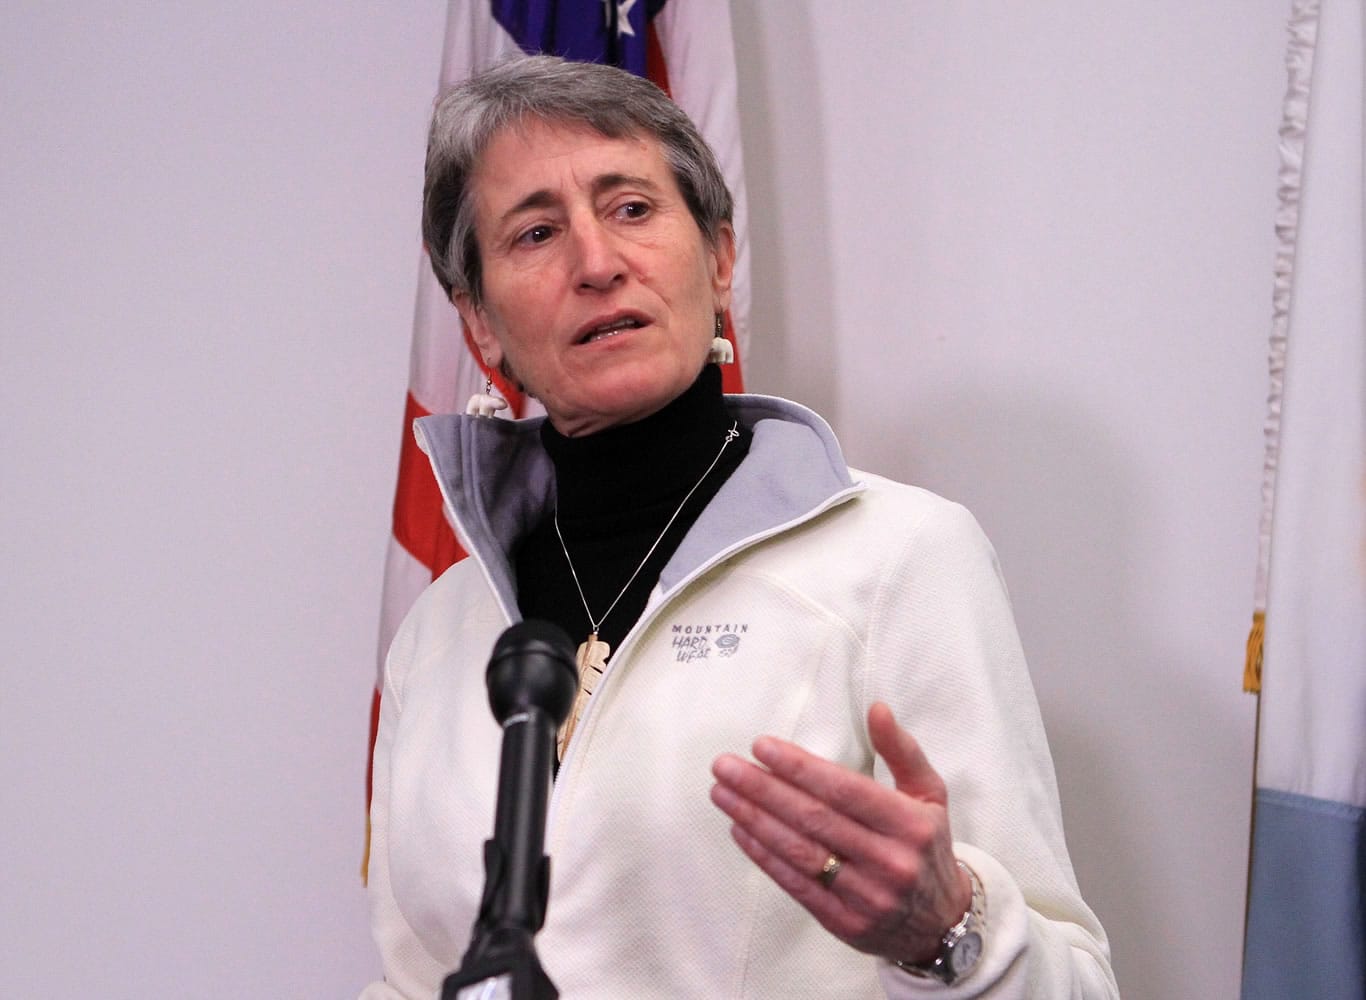 FILE - In this Feb. 17, 2015 file photo, Interior Secretary Sally Jewell speaks in Anchorage, Alaska. The Obama administration is requiring companies that drill for oil and natural gas on federal lands to disclose chemicals used in hydraulic fracturing operations. A final rule released Friday also updates requirements for well construction and disposal of water and other fluids used in fracking, a drilling method that has prompted an ongoing boom in natural gas production.